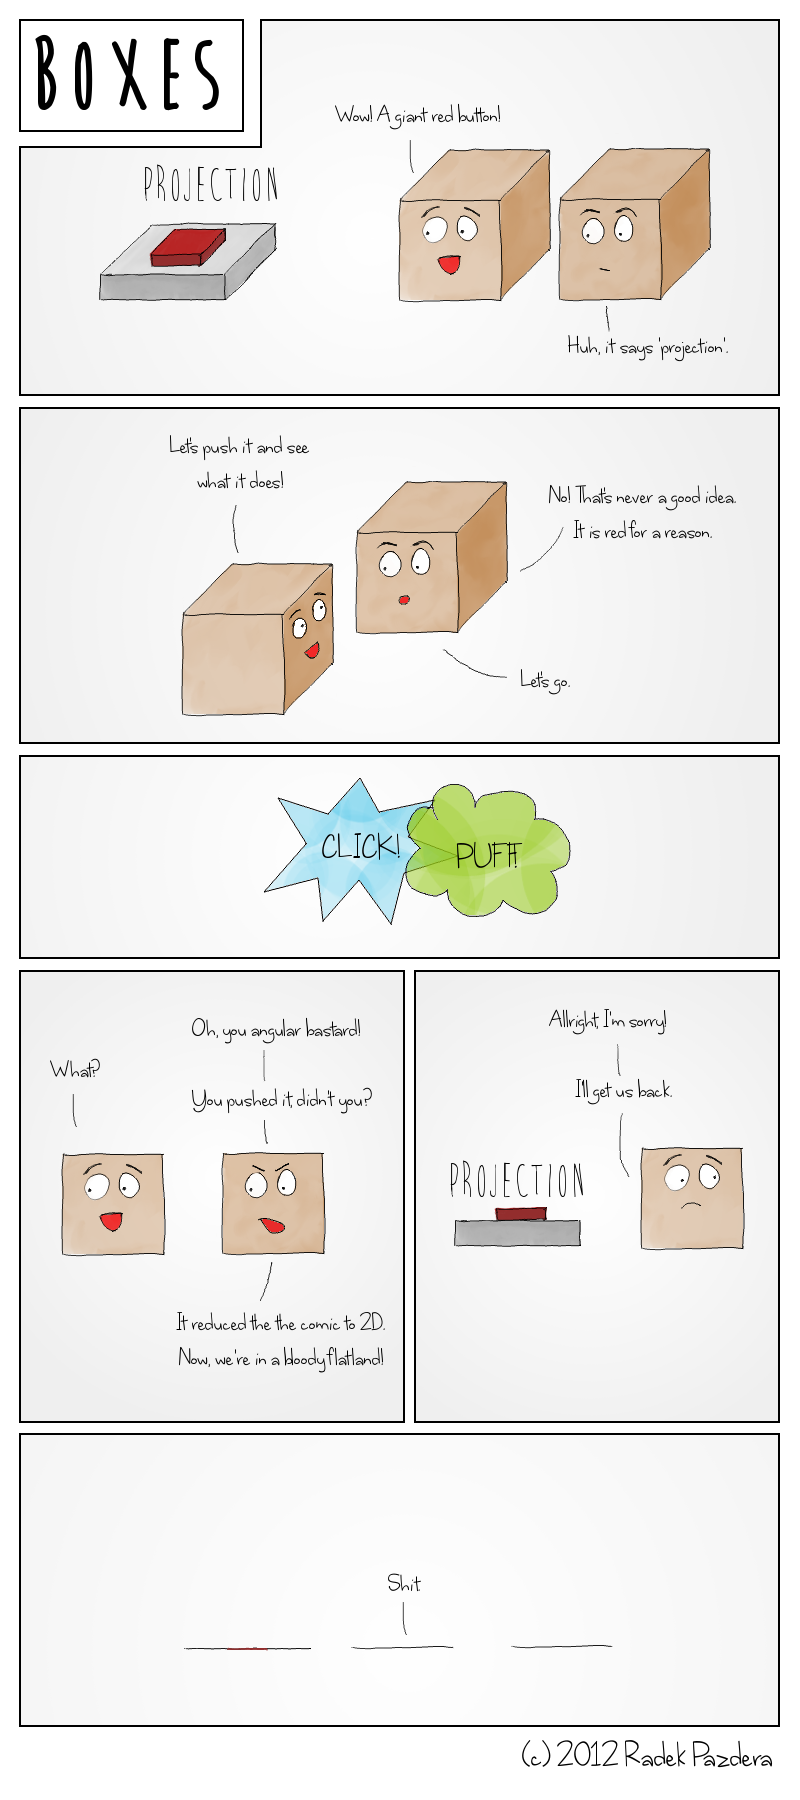 Boxes Comic: Projection